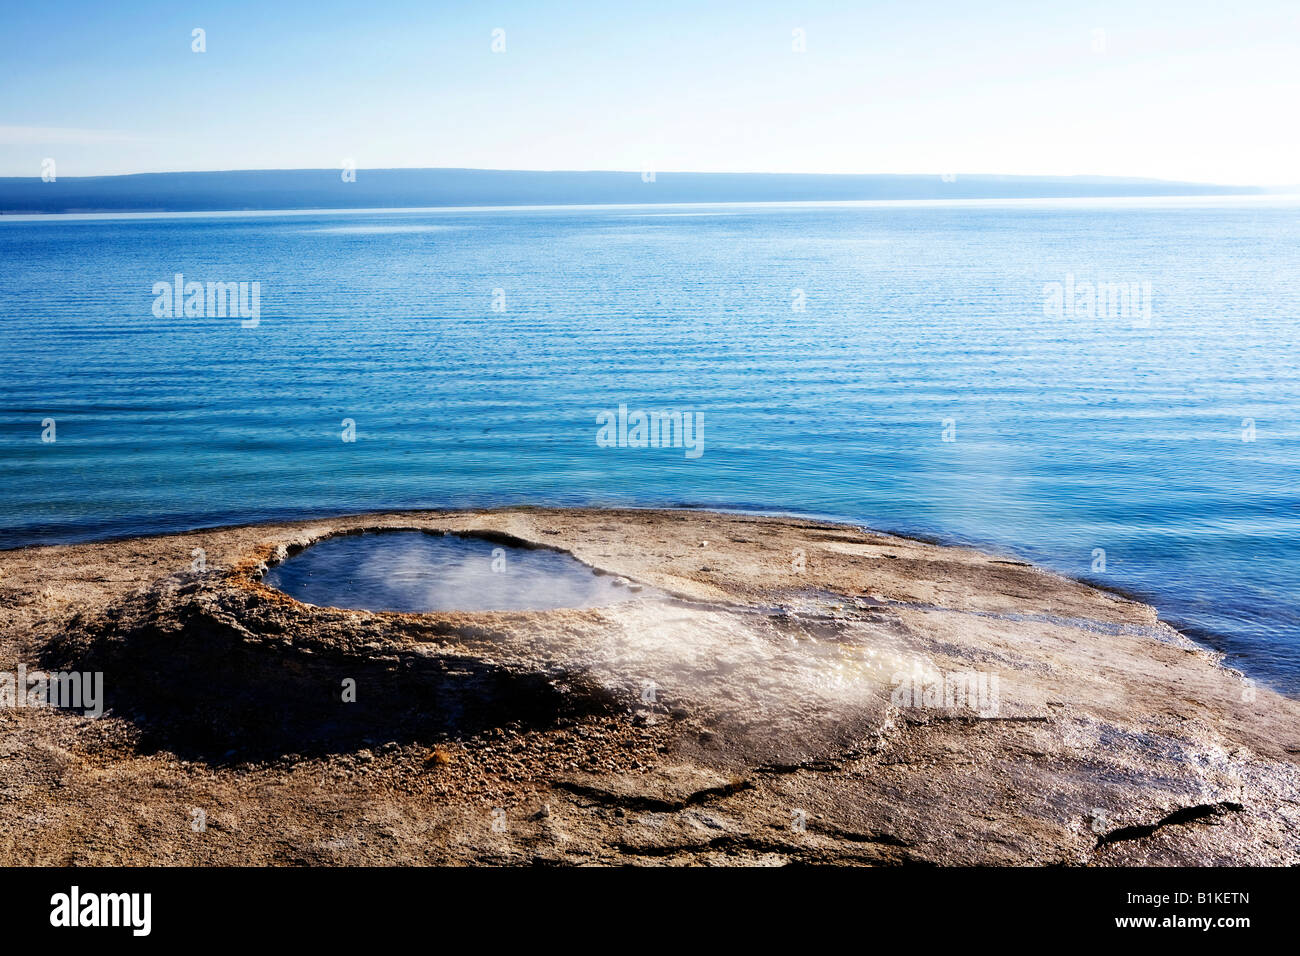 Image looking out over the Fishing Cone thermal feature on the shore of Yellowstone Lake Stock Photo